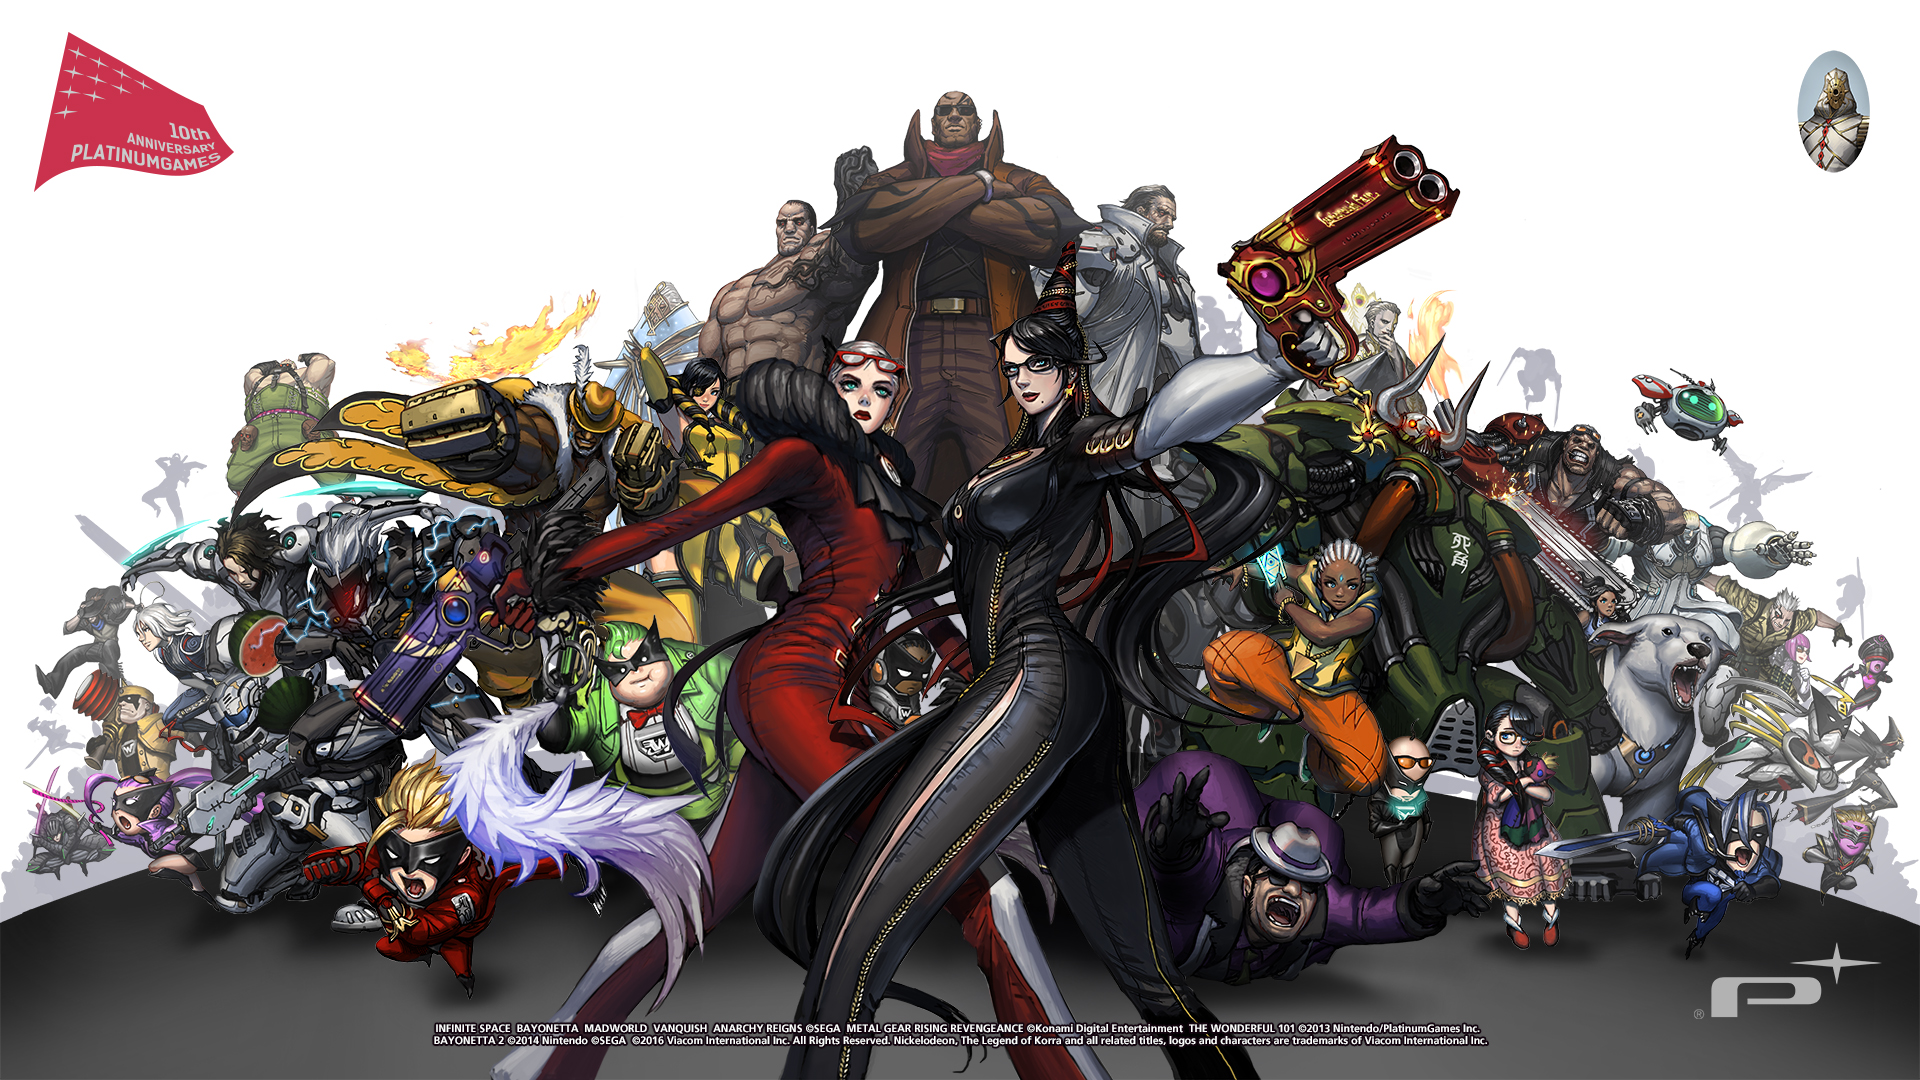 Platinum Games: MadWorld is a reason to buy a Wii